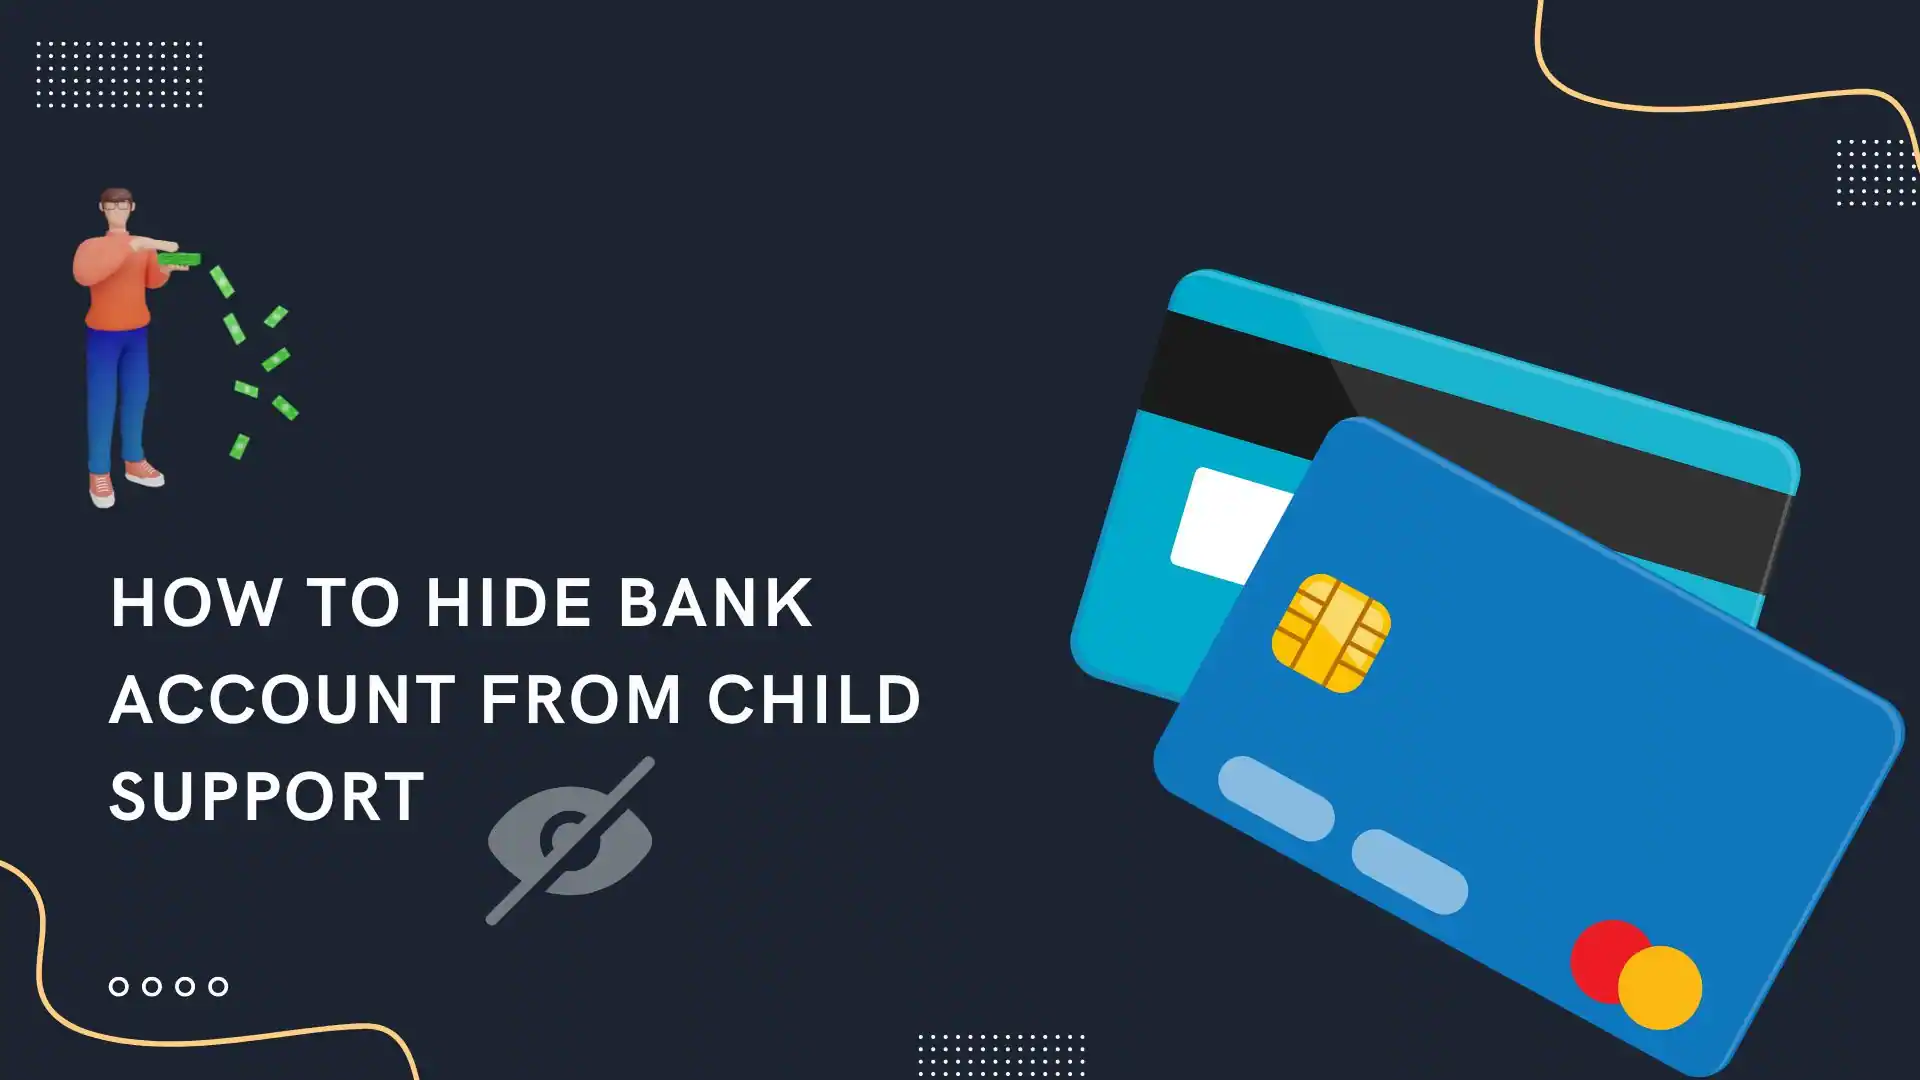 How To Hide Bank Account from Child Support